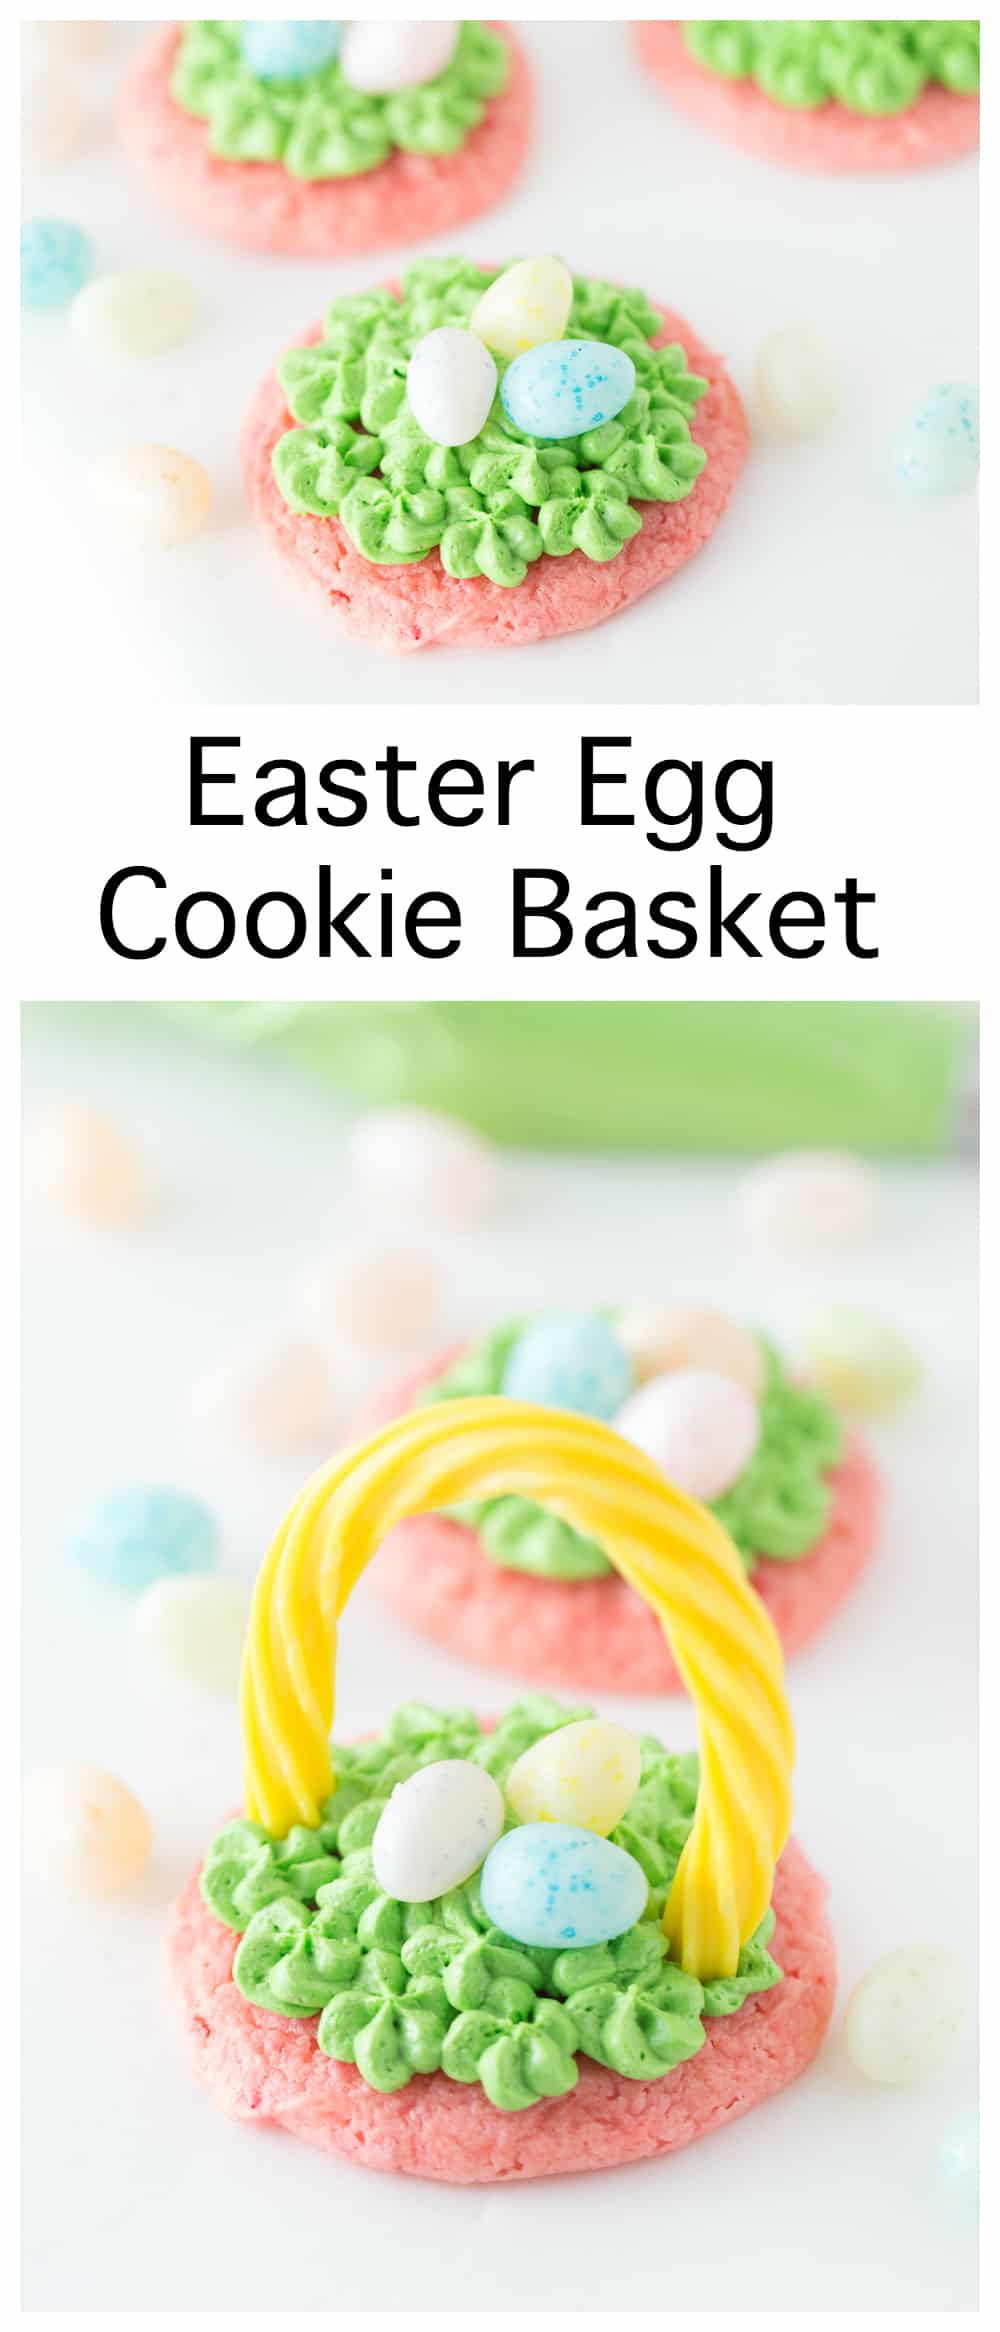 Easter Egg Cookie Baskets are a great Easter treat for the kids!